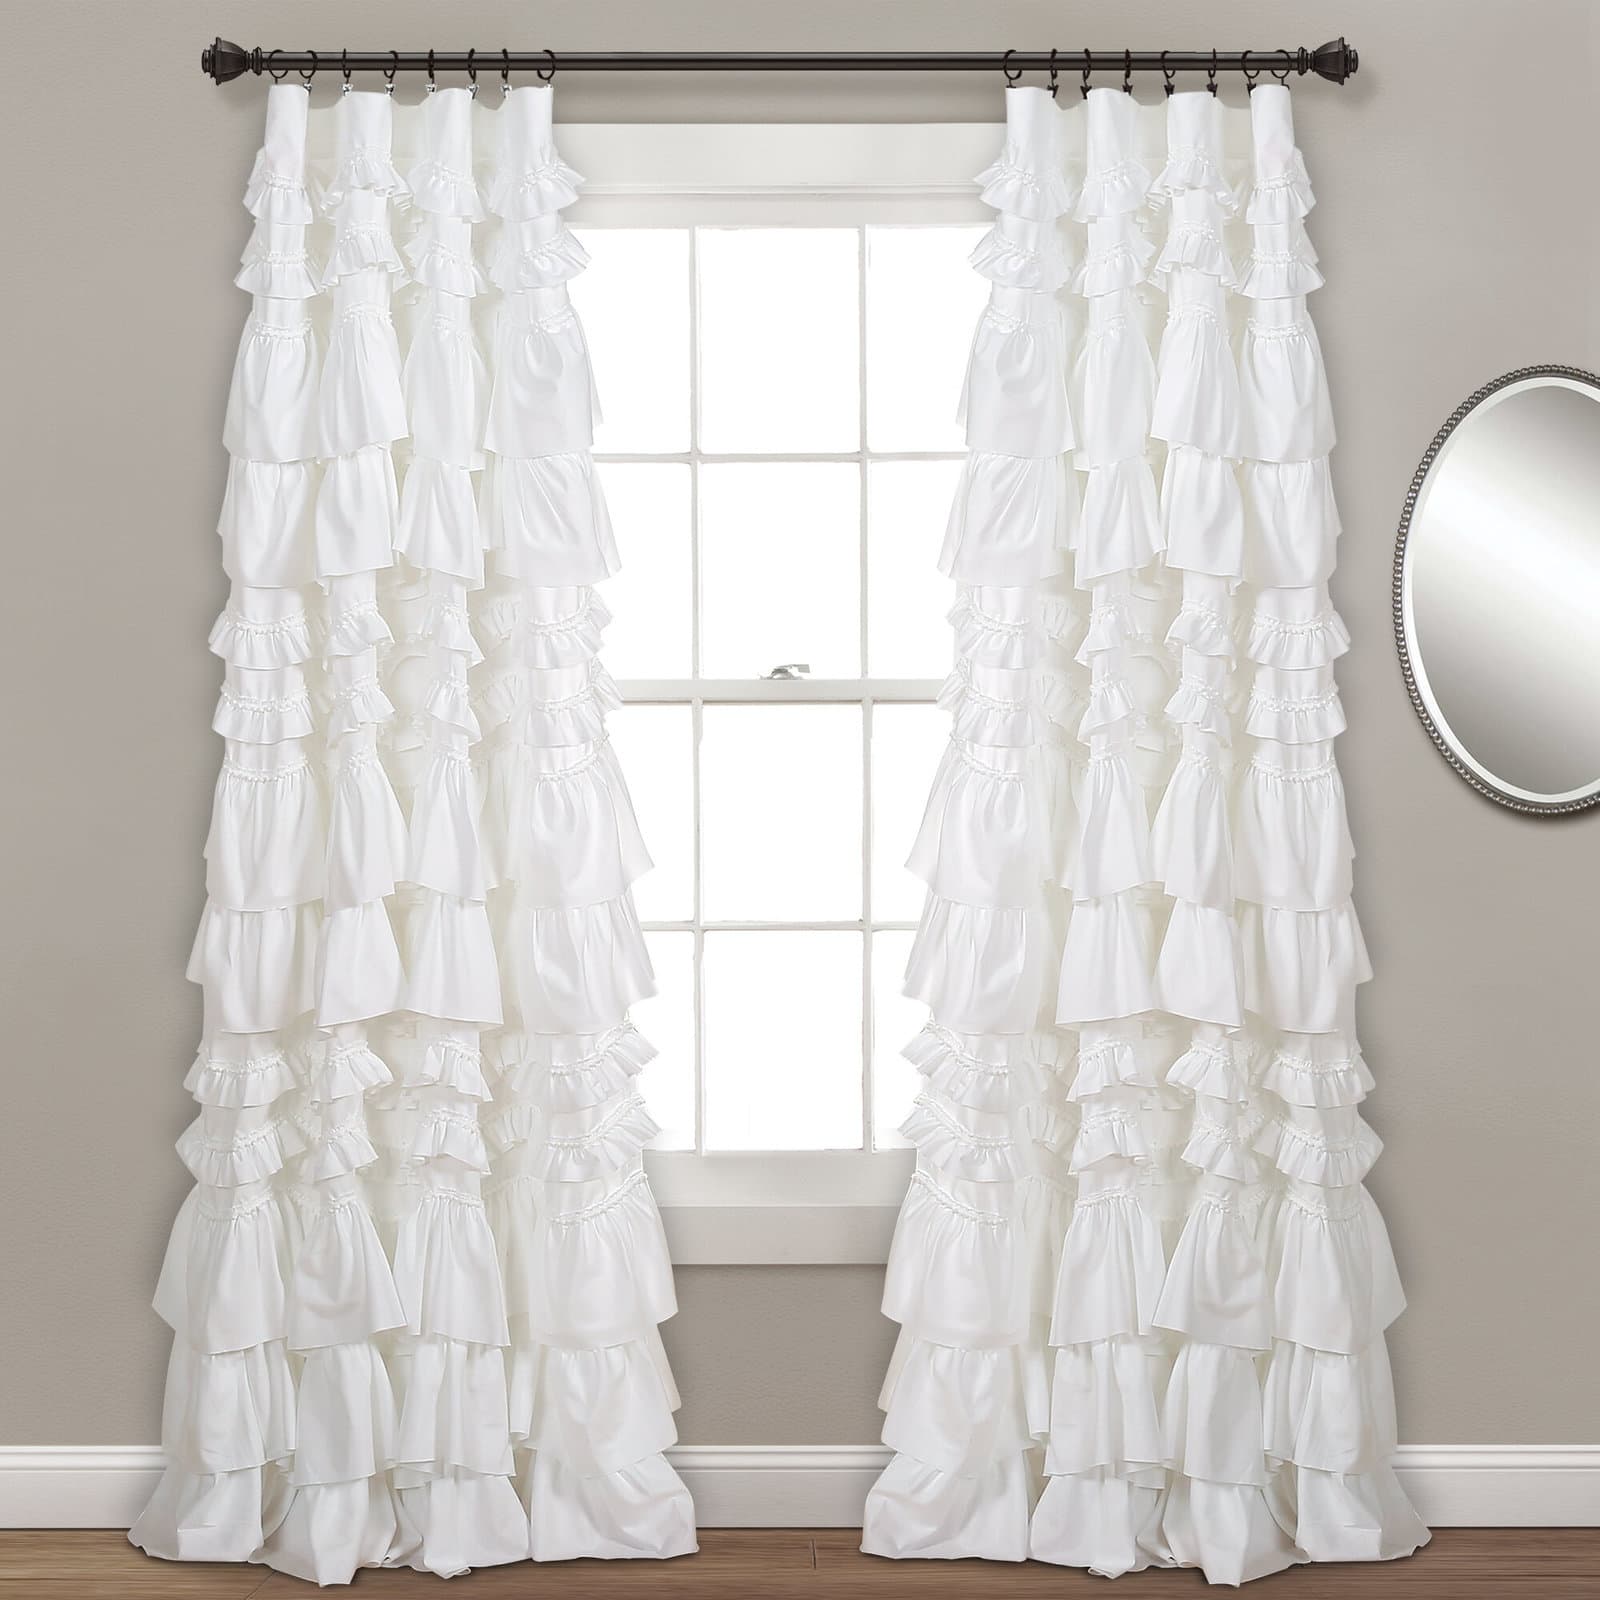 <strong>Try Ruffled Curtains For Unique Textures In the Room </strong>